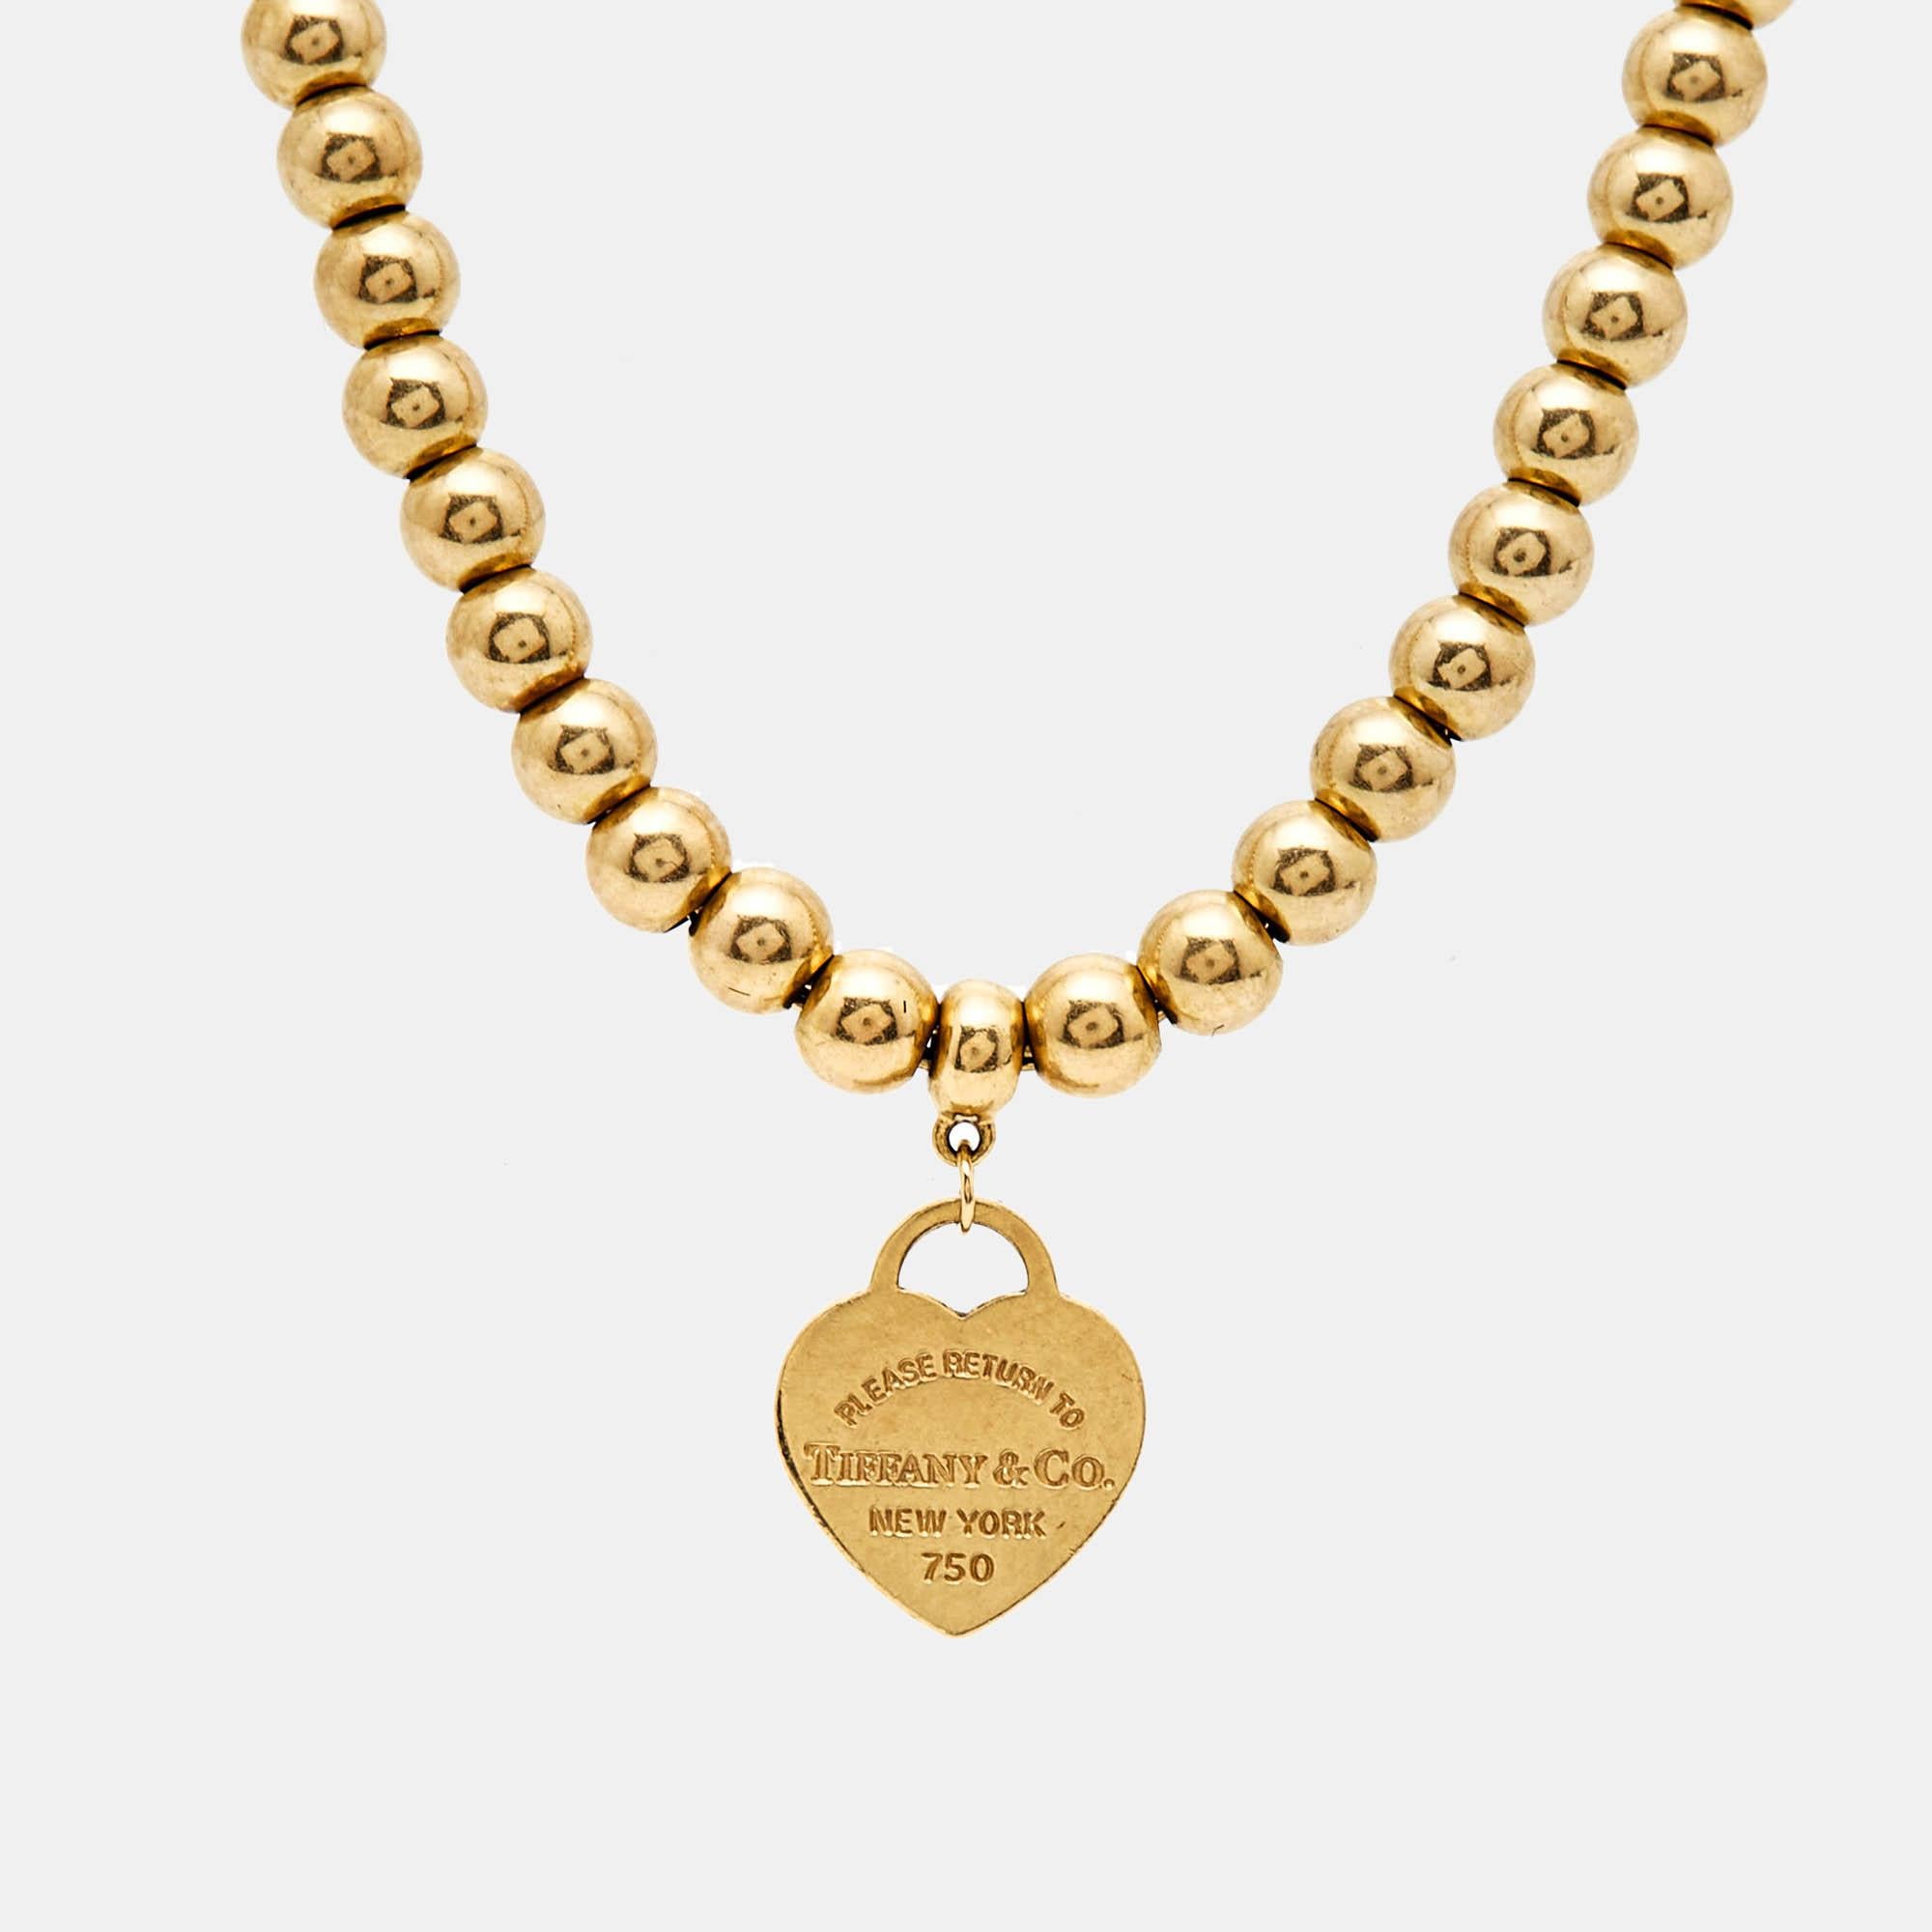 Sculpted with exquisite attention to detail, the Return To Tiffany bracelet exudes timeless charm. Made of radiant 18k yellow gold, it features a delicate beaded chain design. The iconic heart tag adds a touch of romantic elegance, making it a